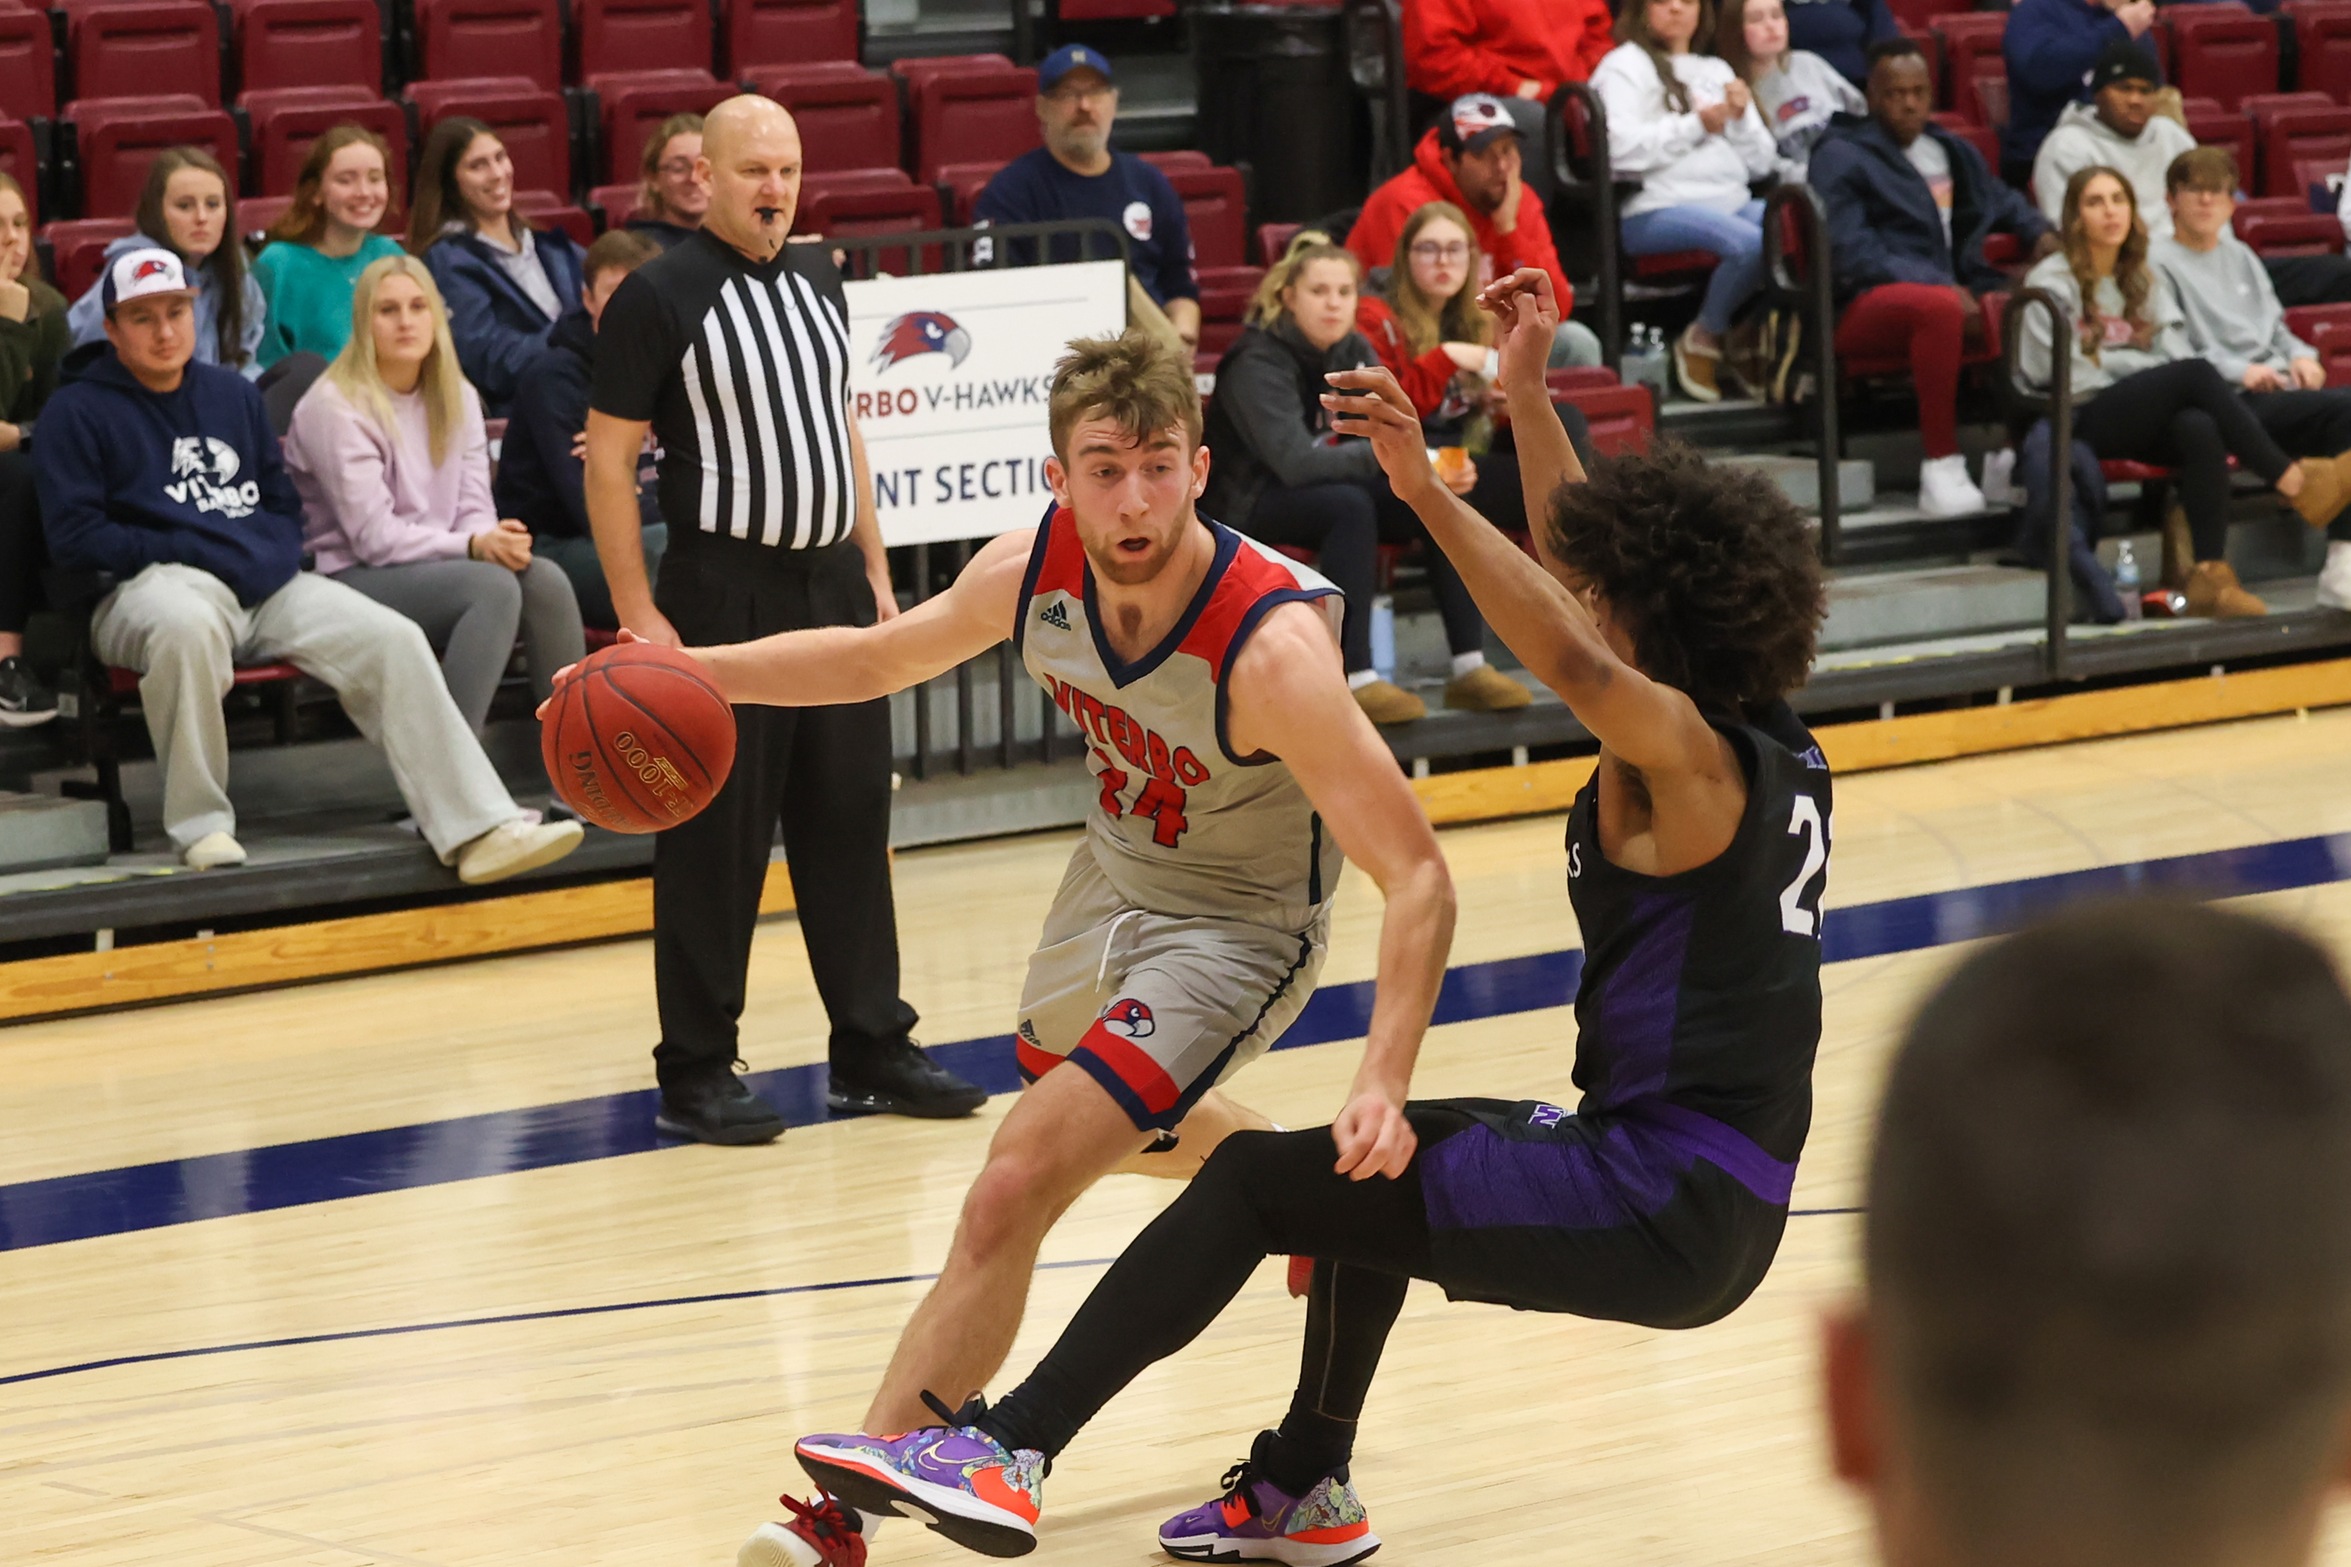 Balanced Scoring Attack Leads V-Hawks to Road Conference Win